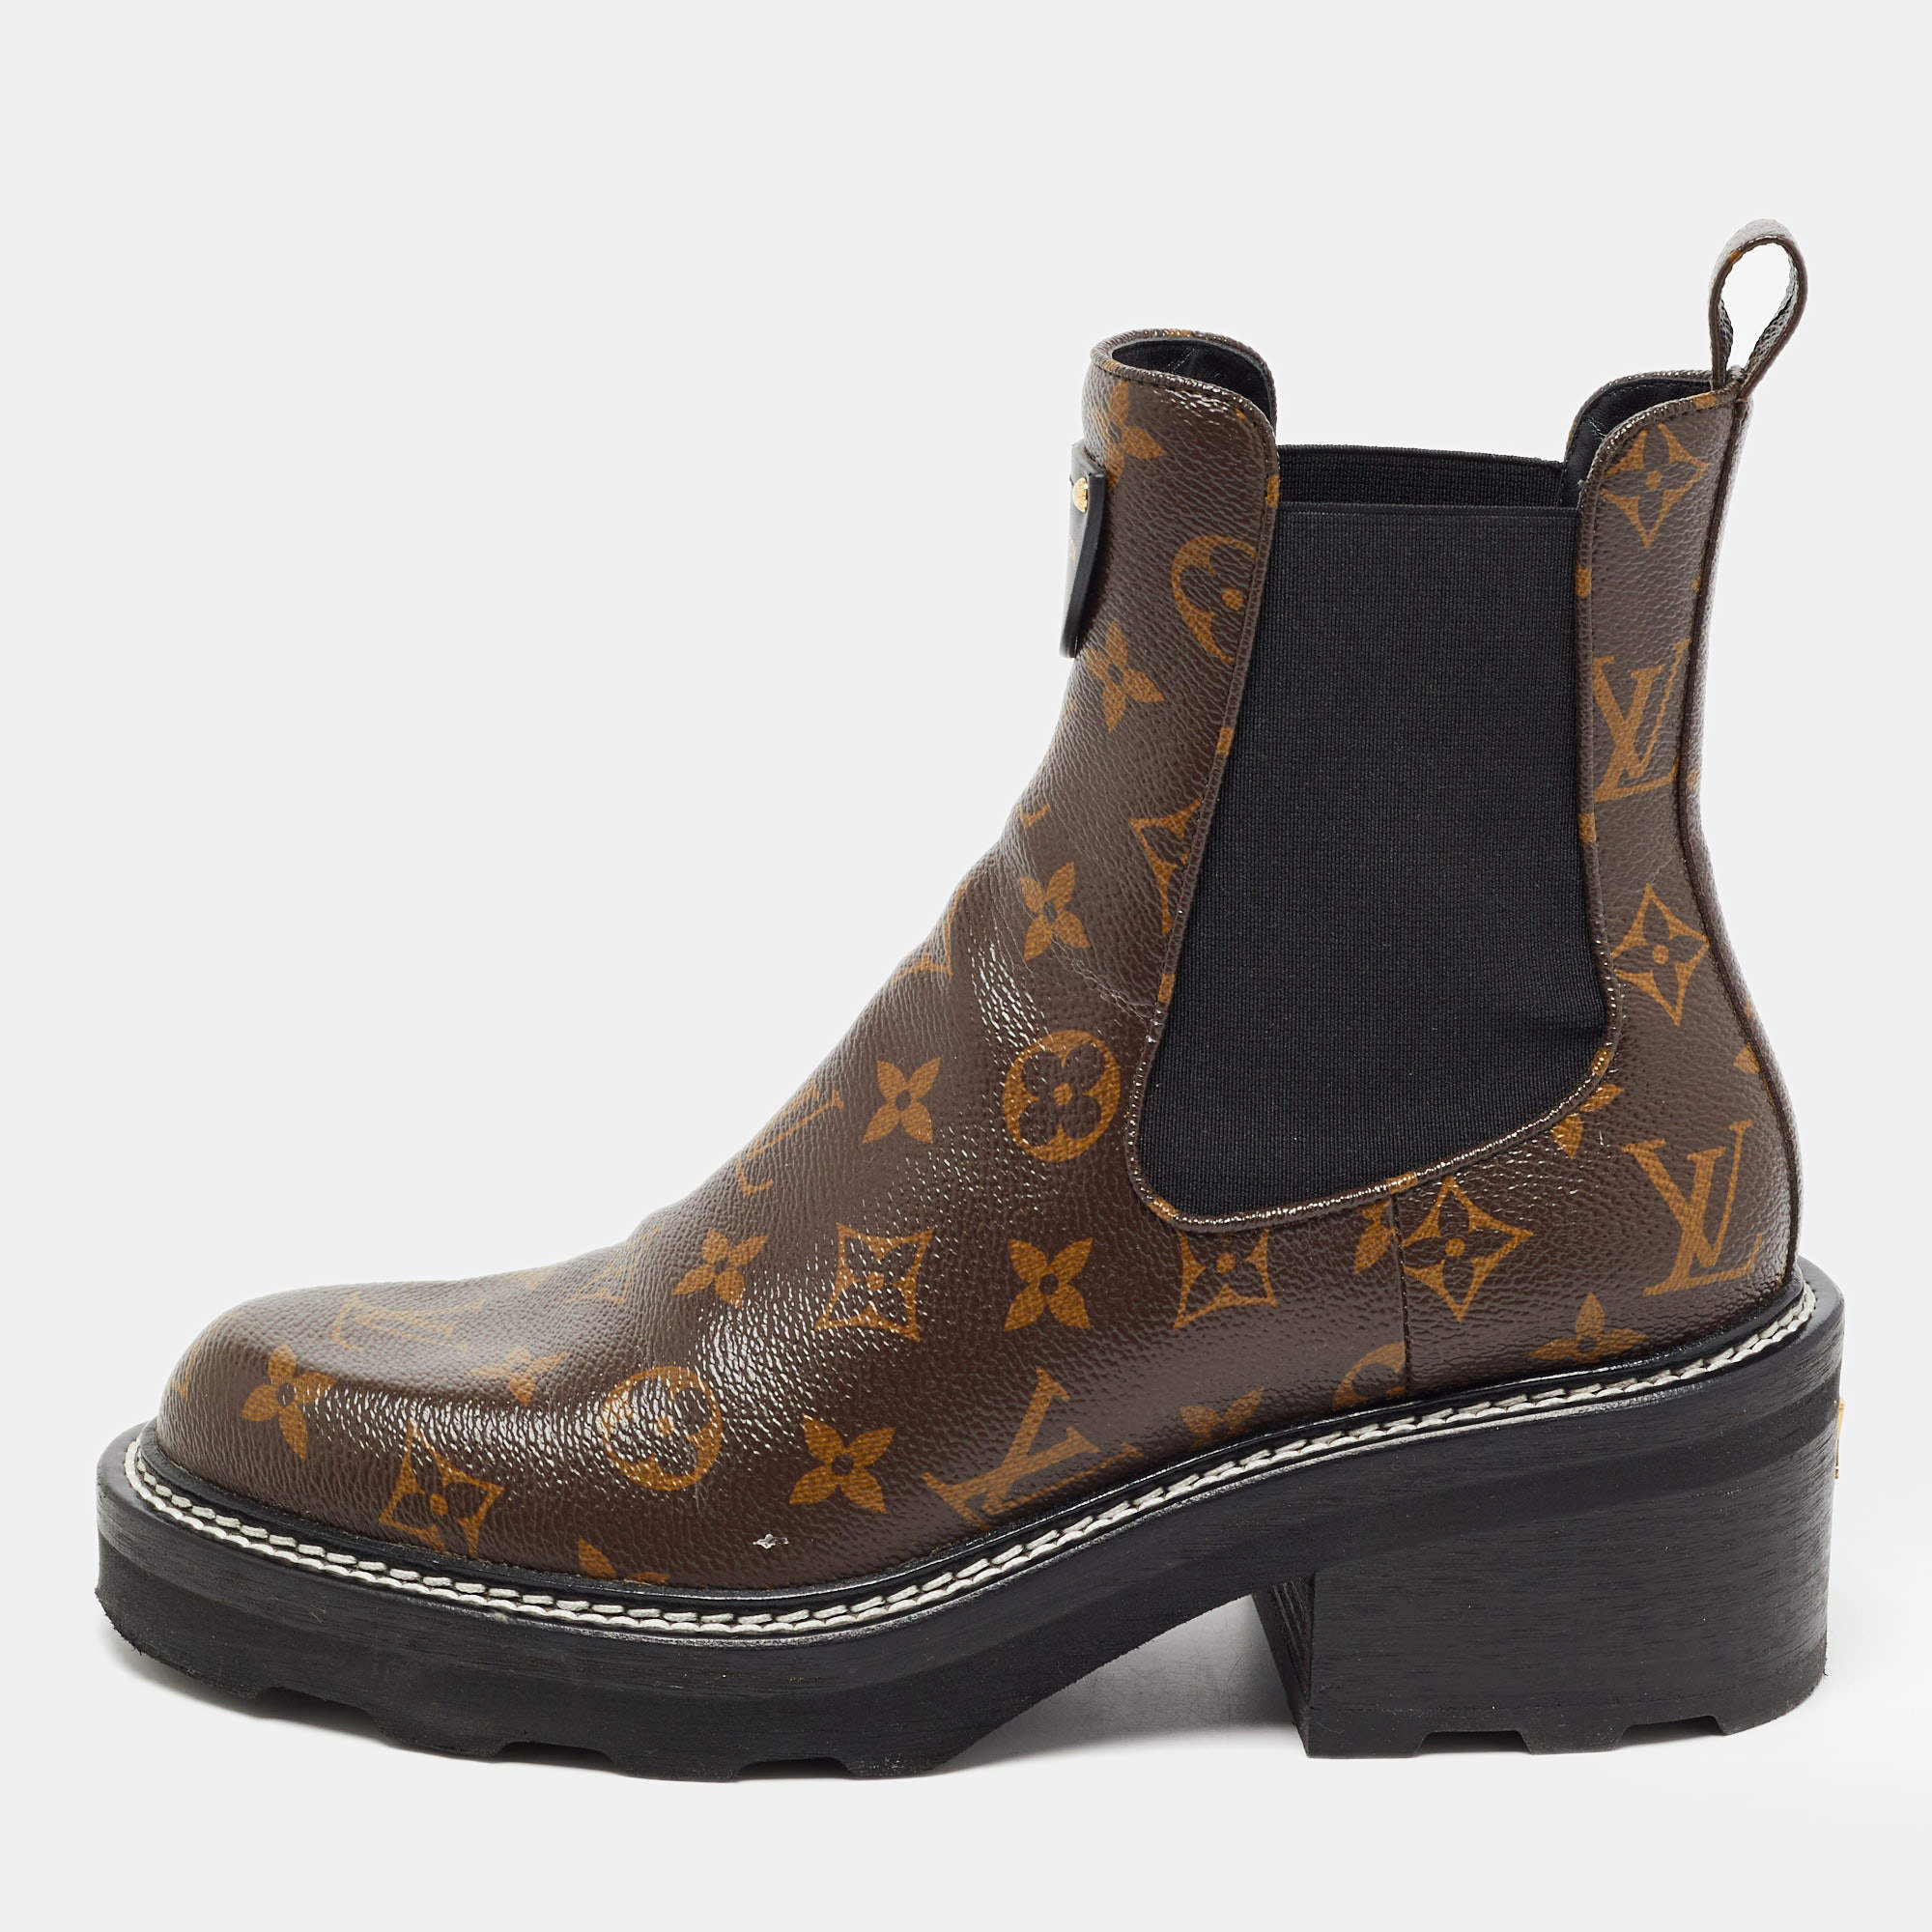 Louis Vuitton Monogram Canvas and Black Leather Beaubourg Ankle